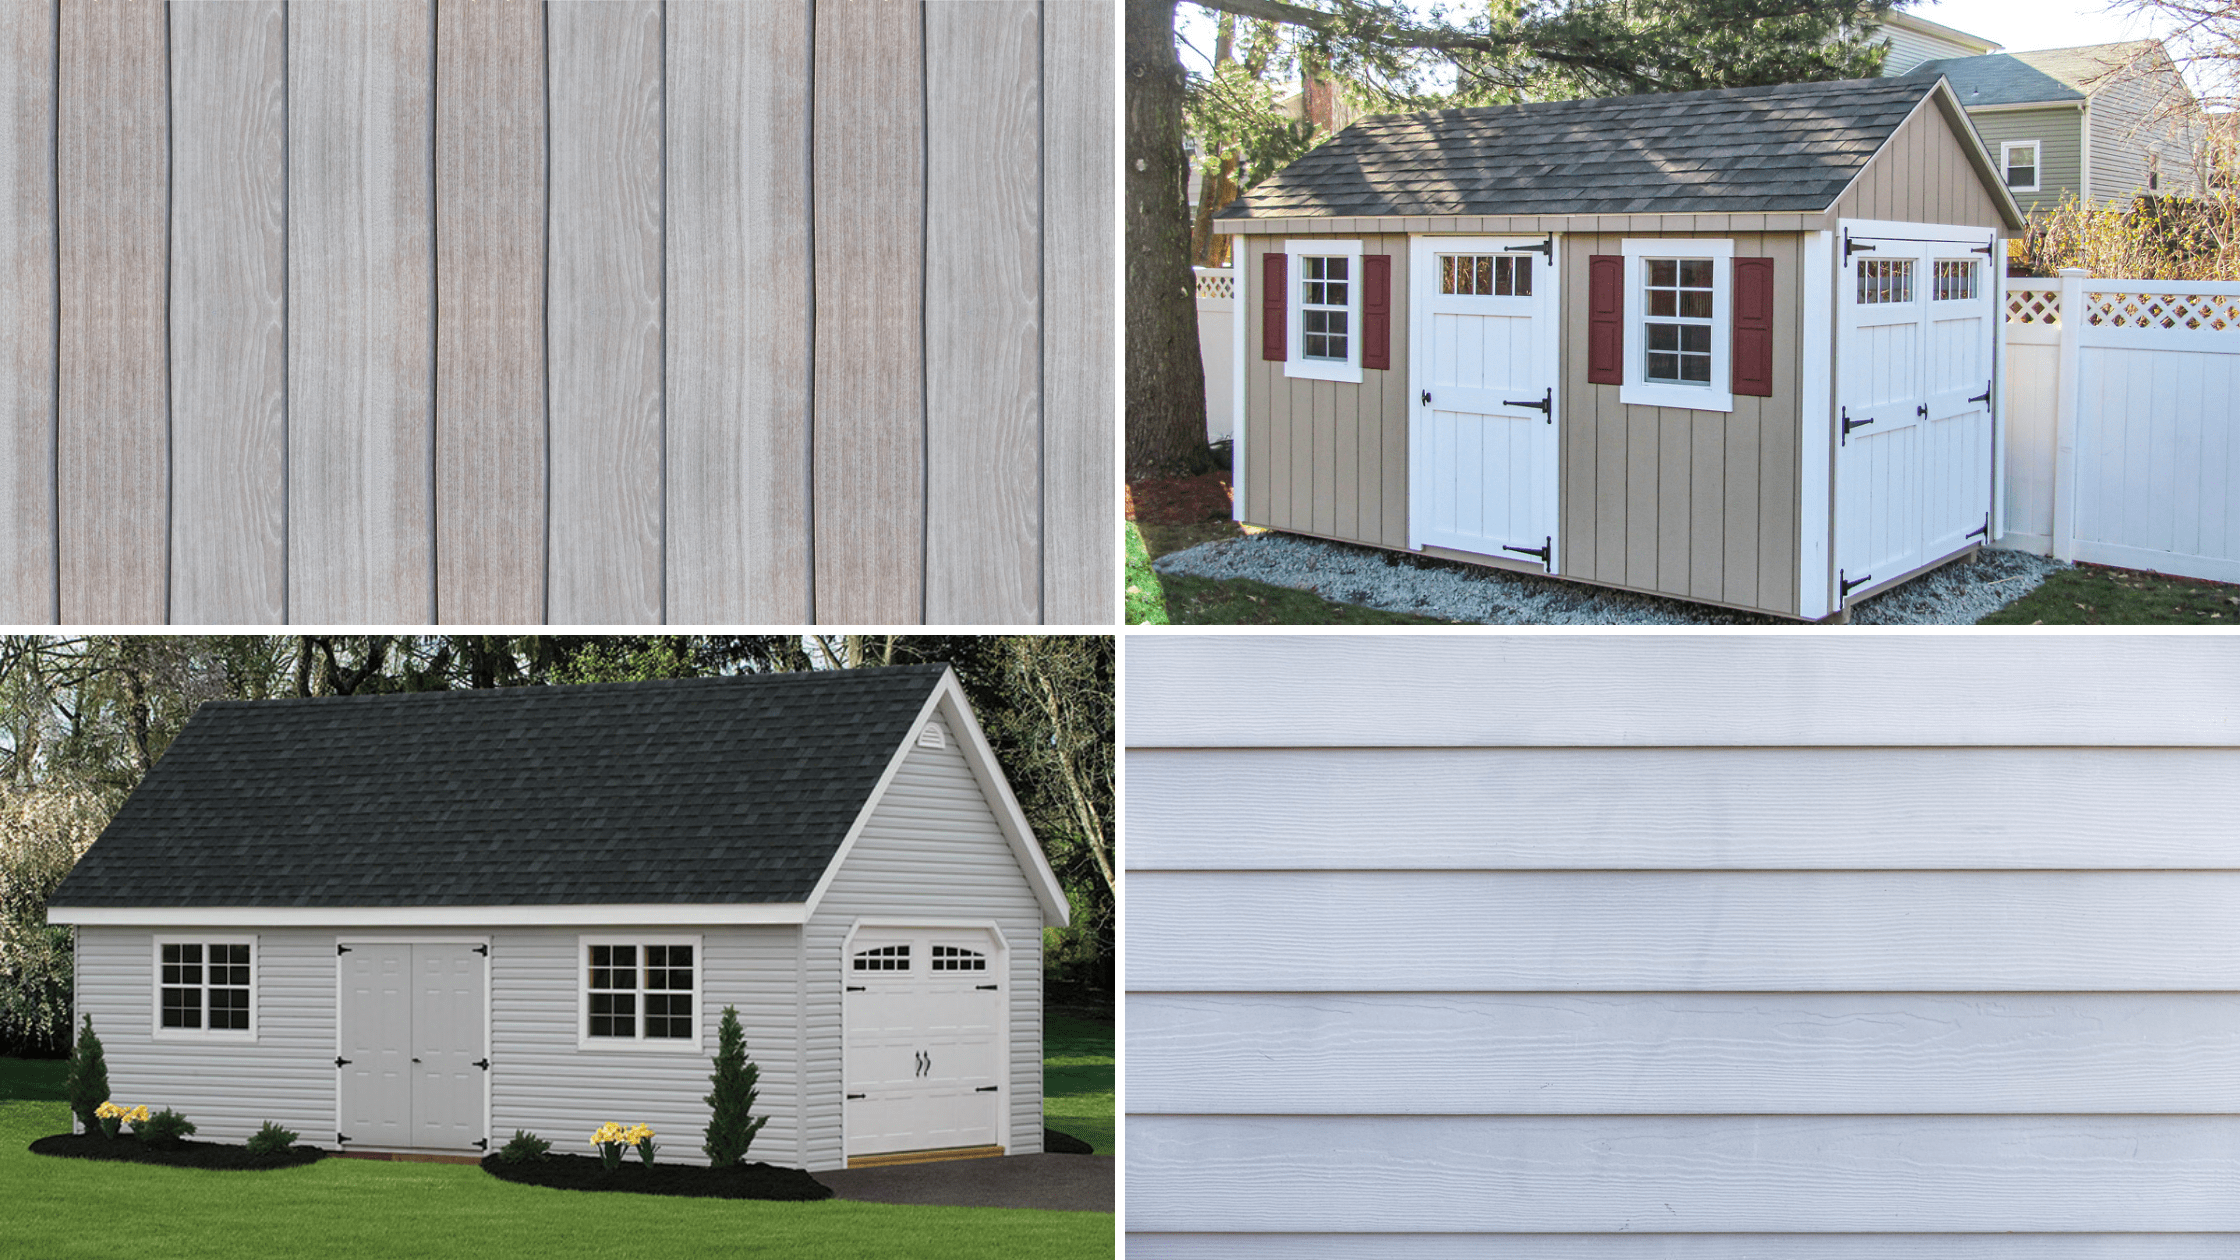 Wood Siding vs. Vinyl Siding: Which One is Better?